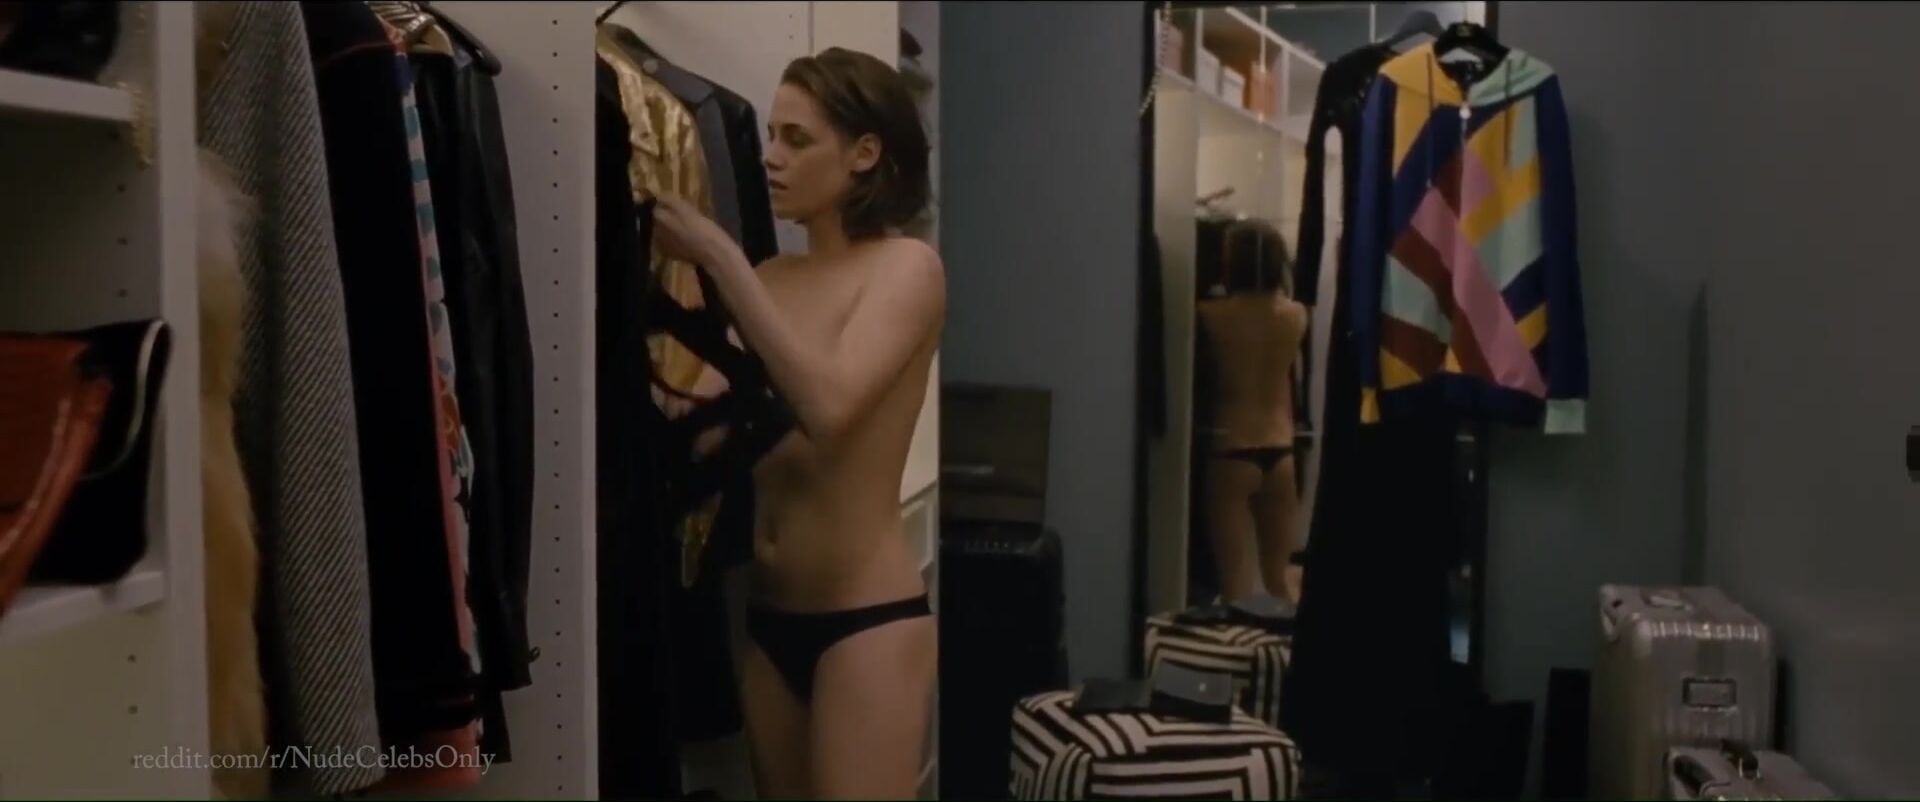 Submissive Celebs video HD compilation of hot movie star Kristen Stewart starring in the nude Massage Sex